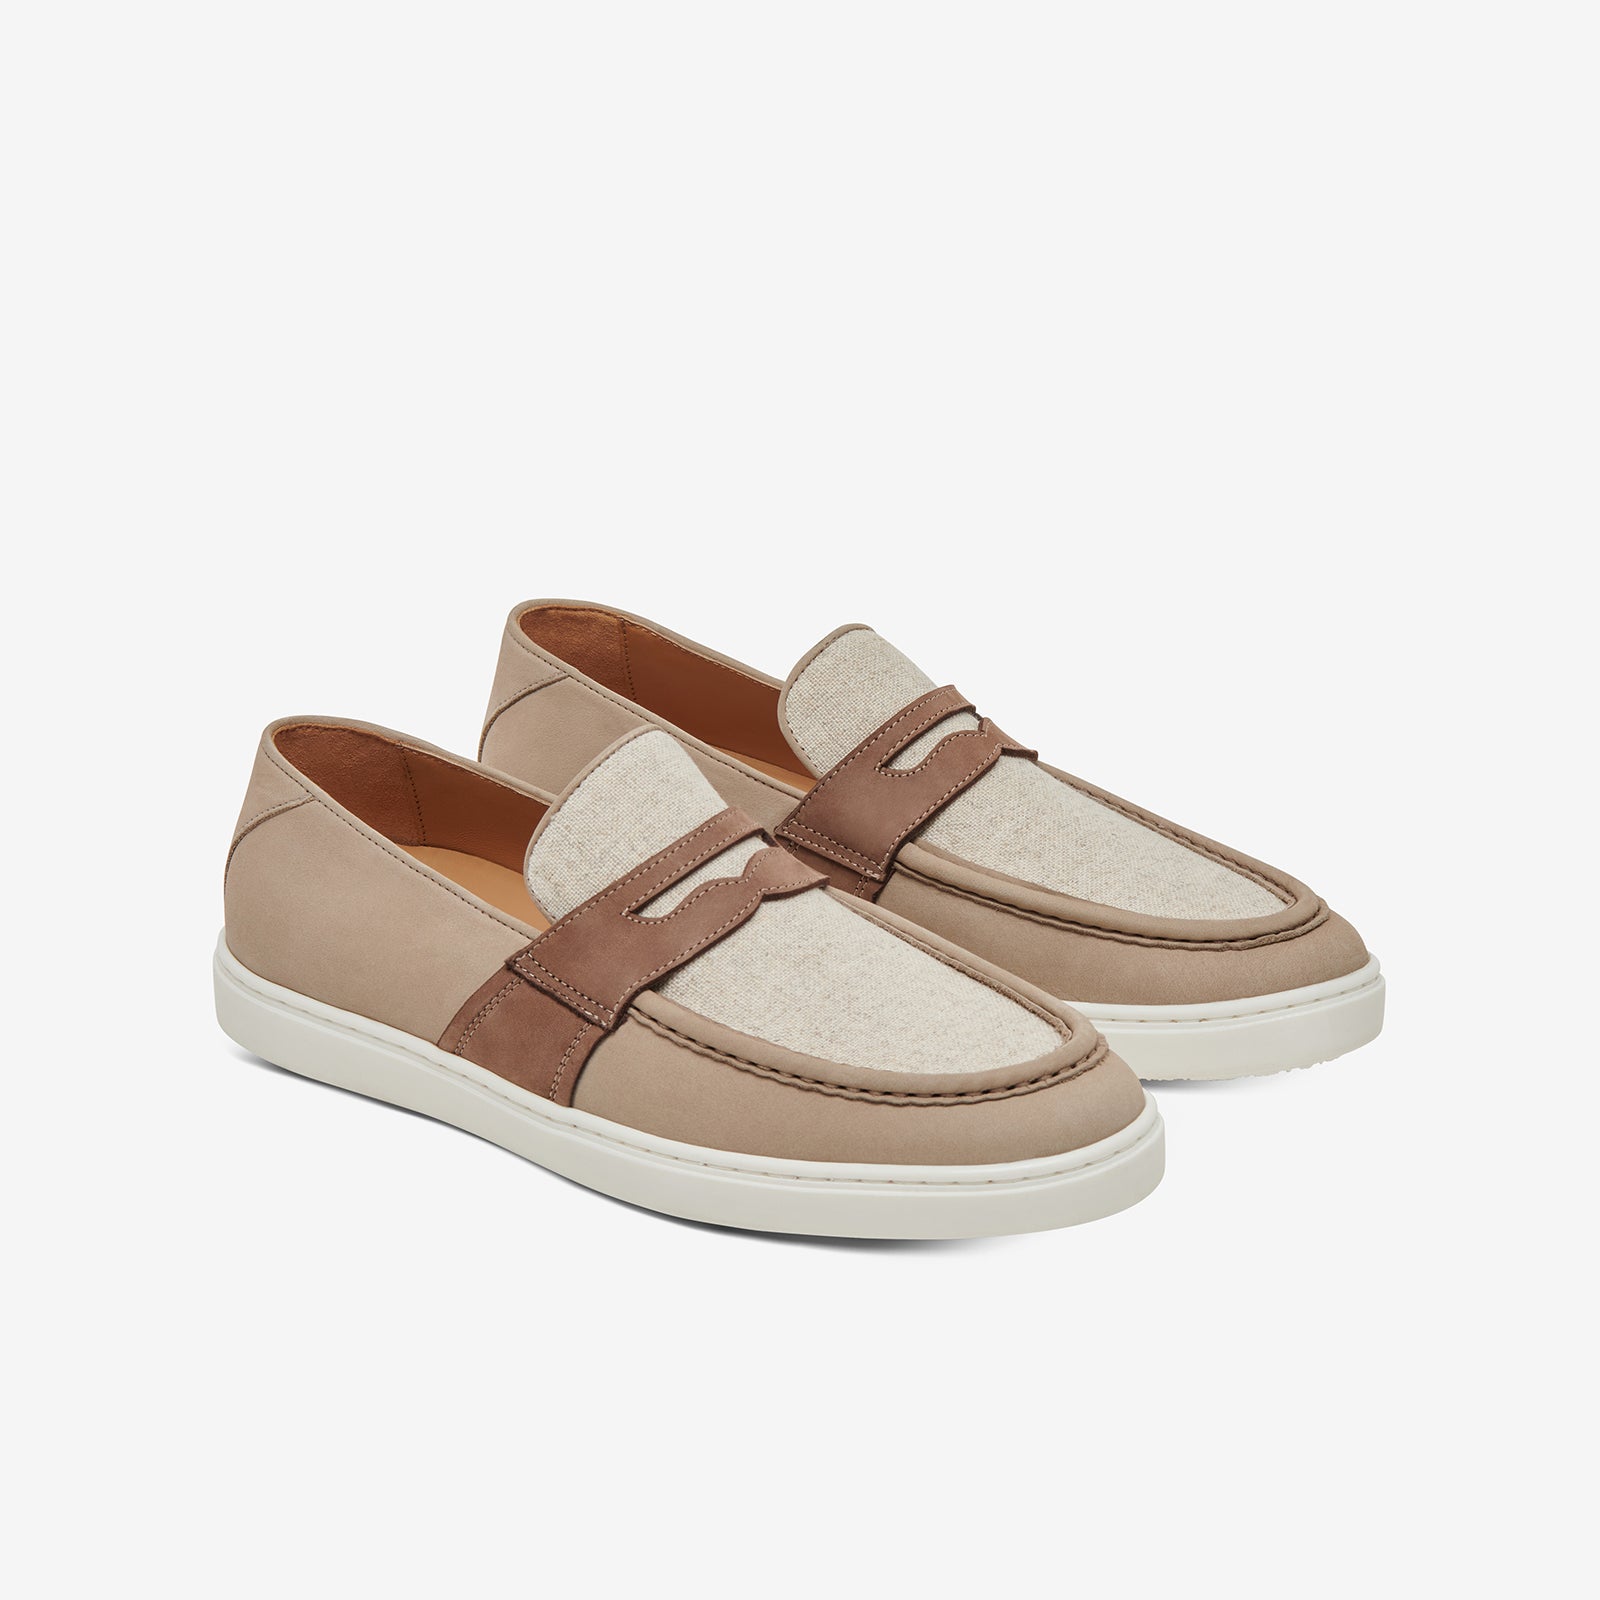 Greats - The Paros Penny Loafer - Natural - Men's Shoe – GREATS